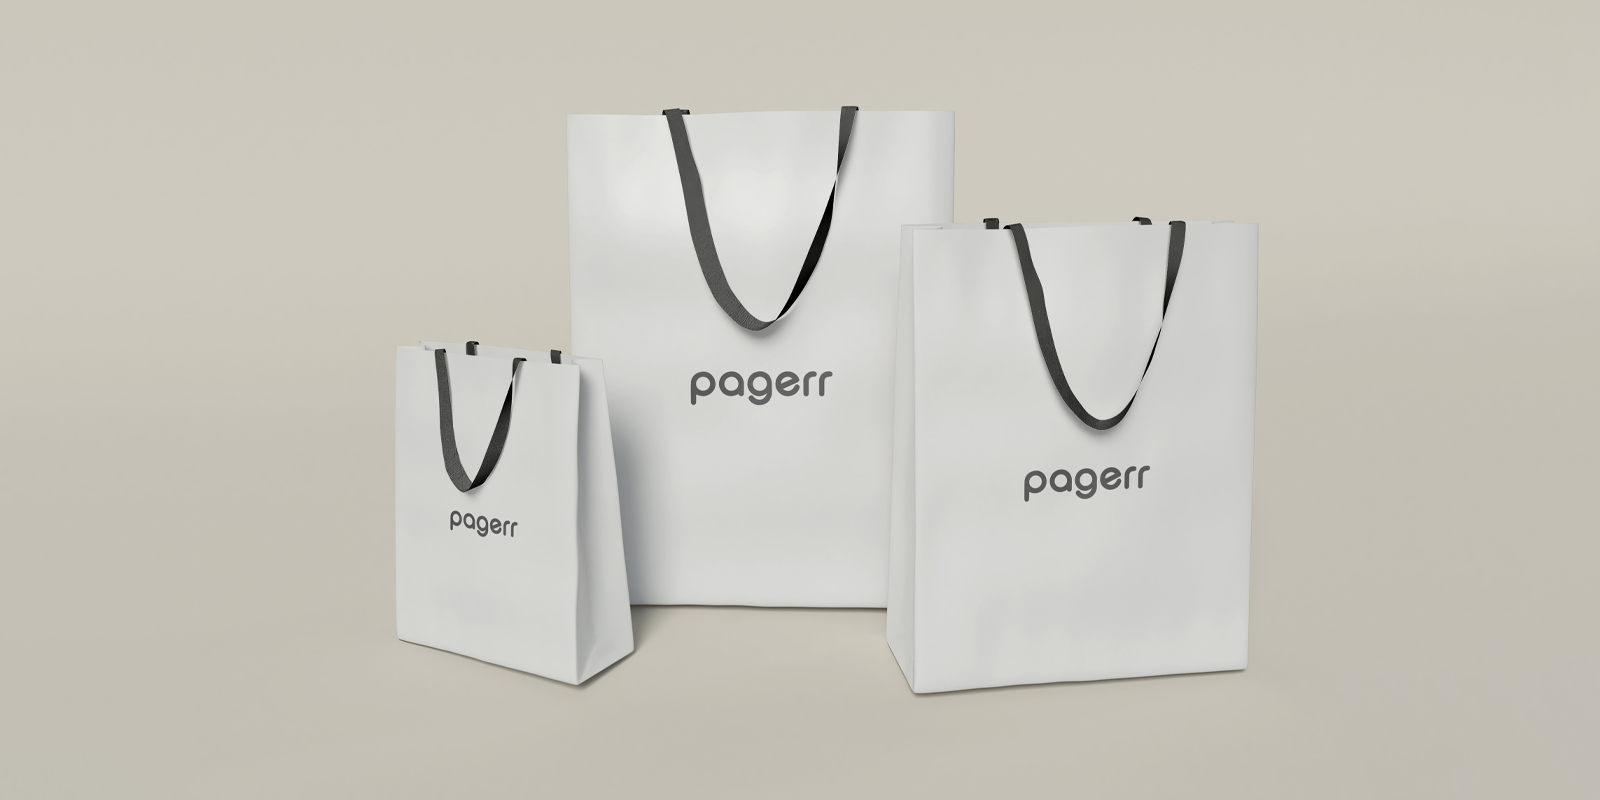 Shopping bags in Tallinn - Print with Pagerr